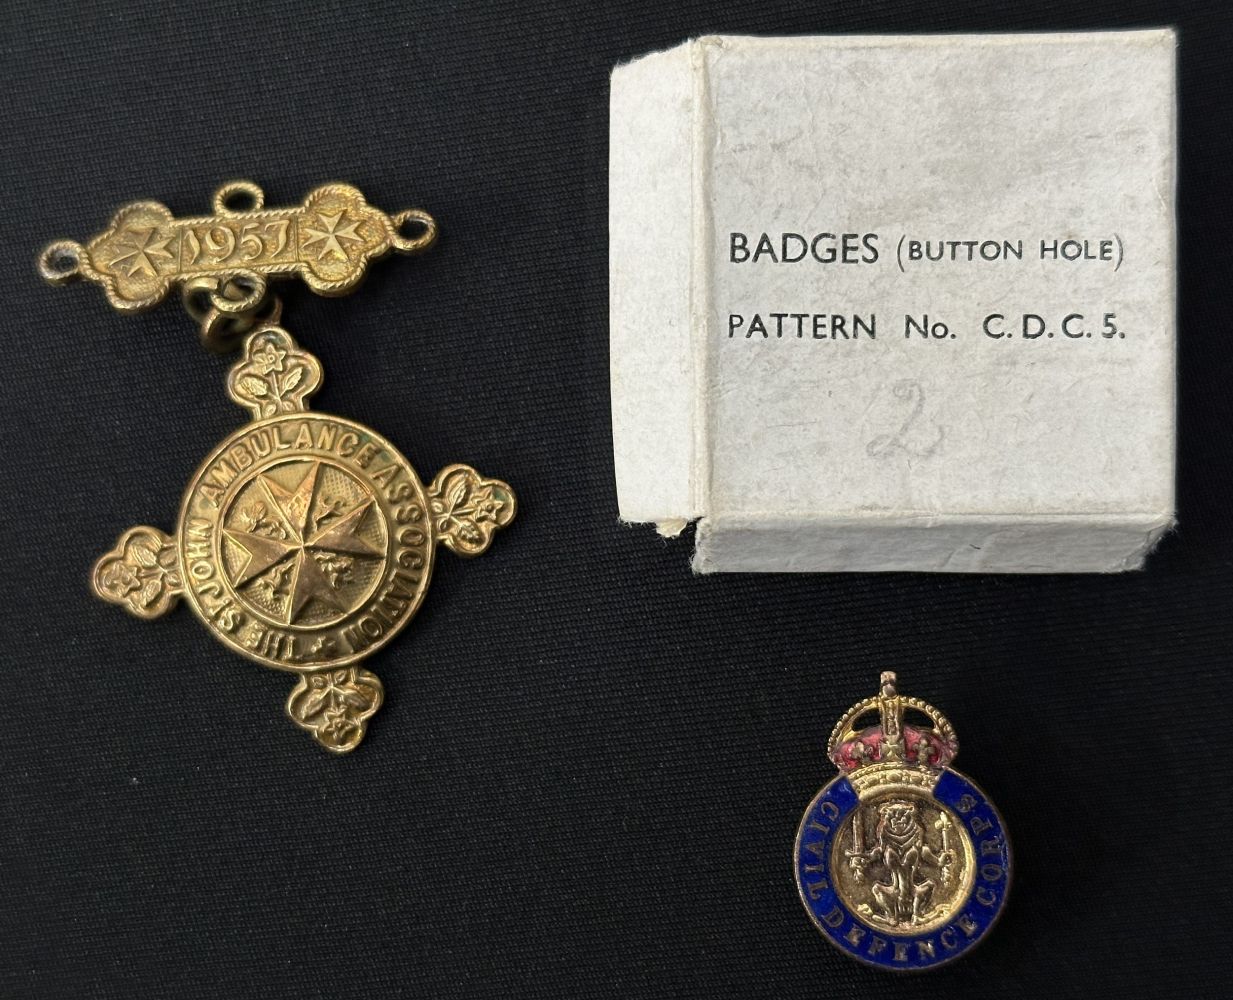 Service Medal of the Order of St John complete with ribbon, un-named: British Red Cross Medal to - Image 4 of 5